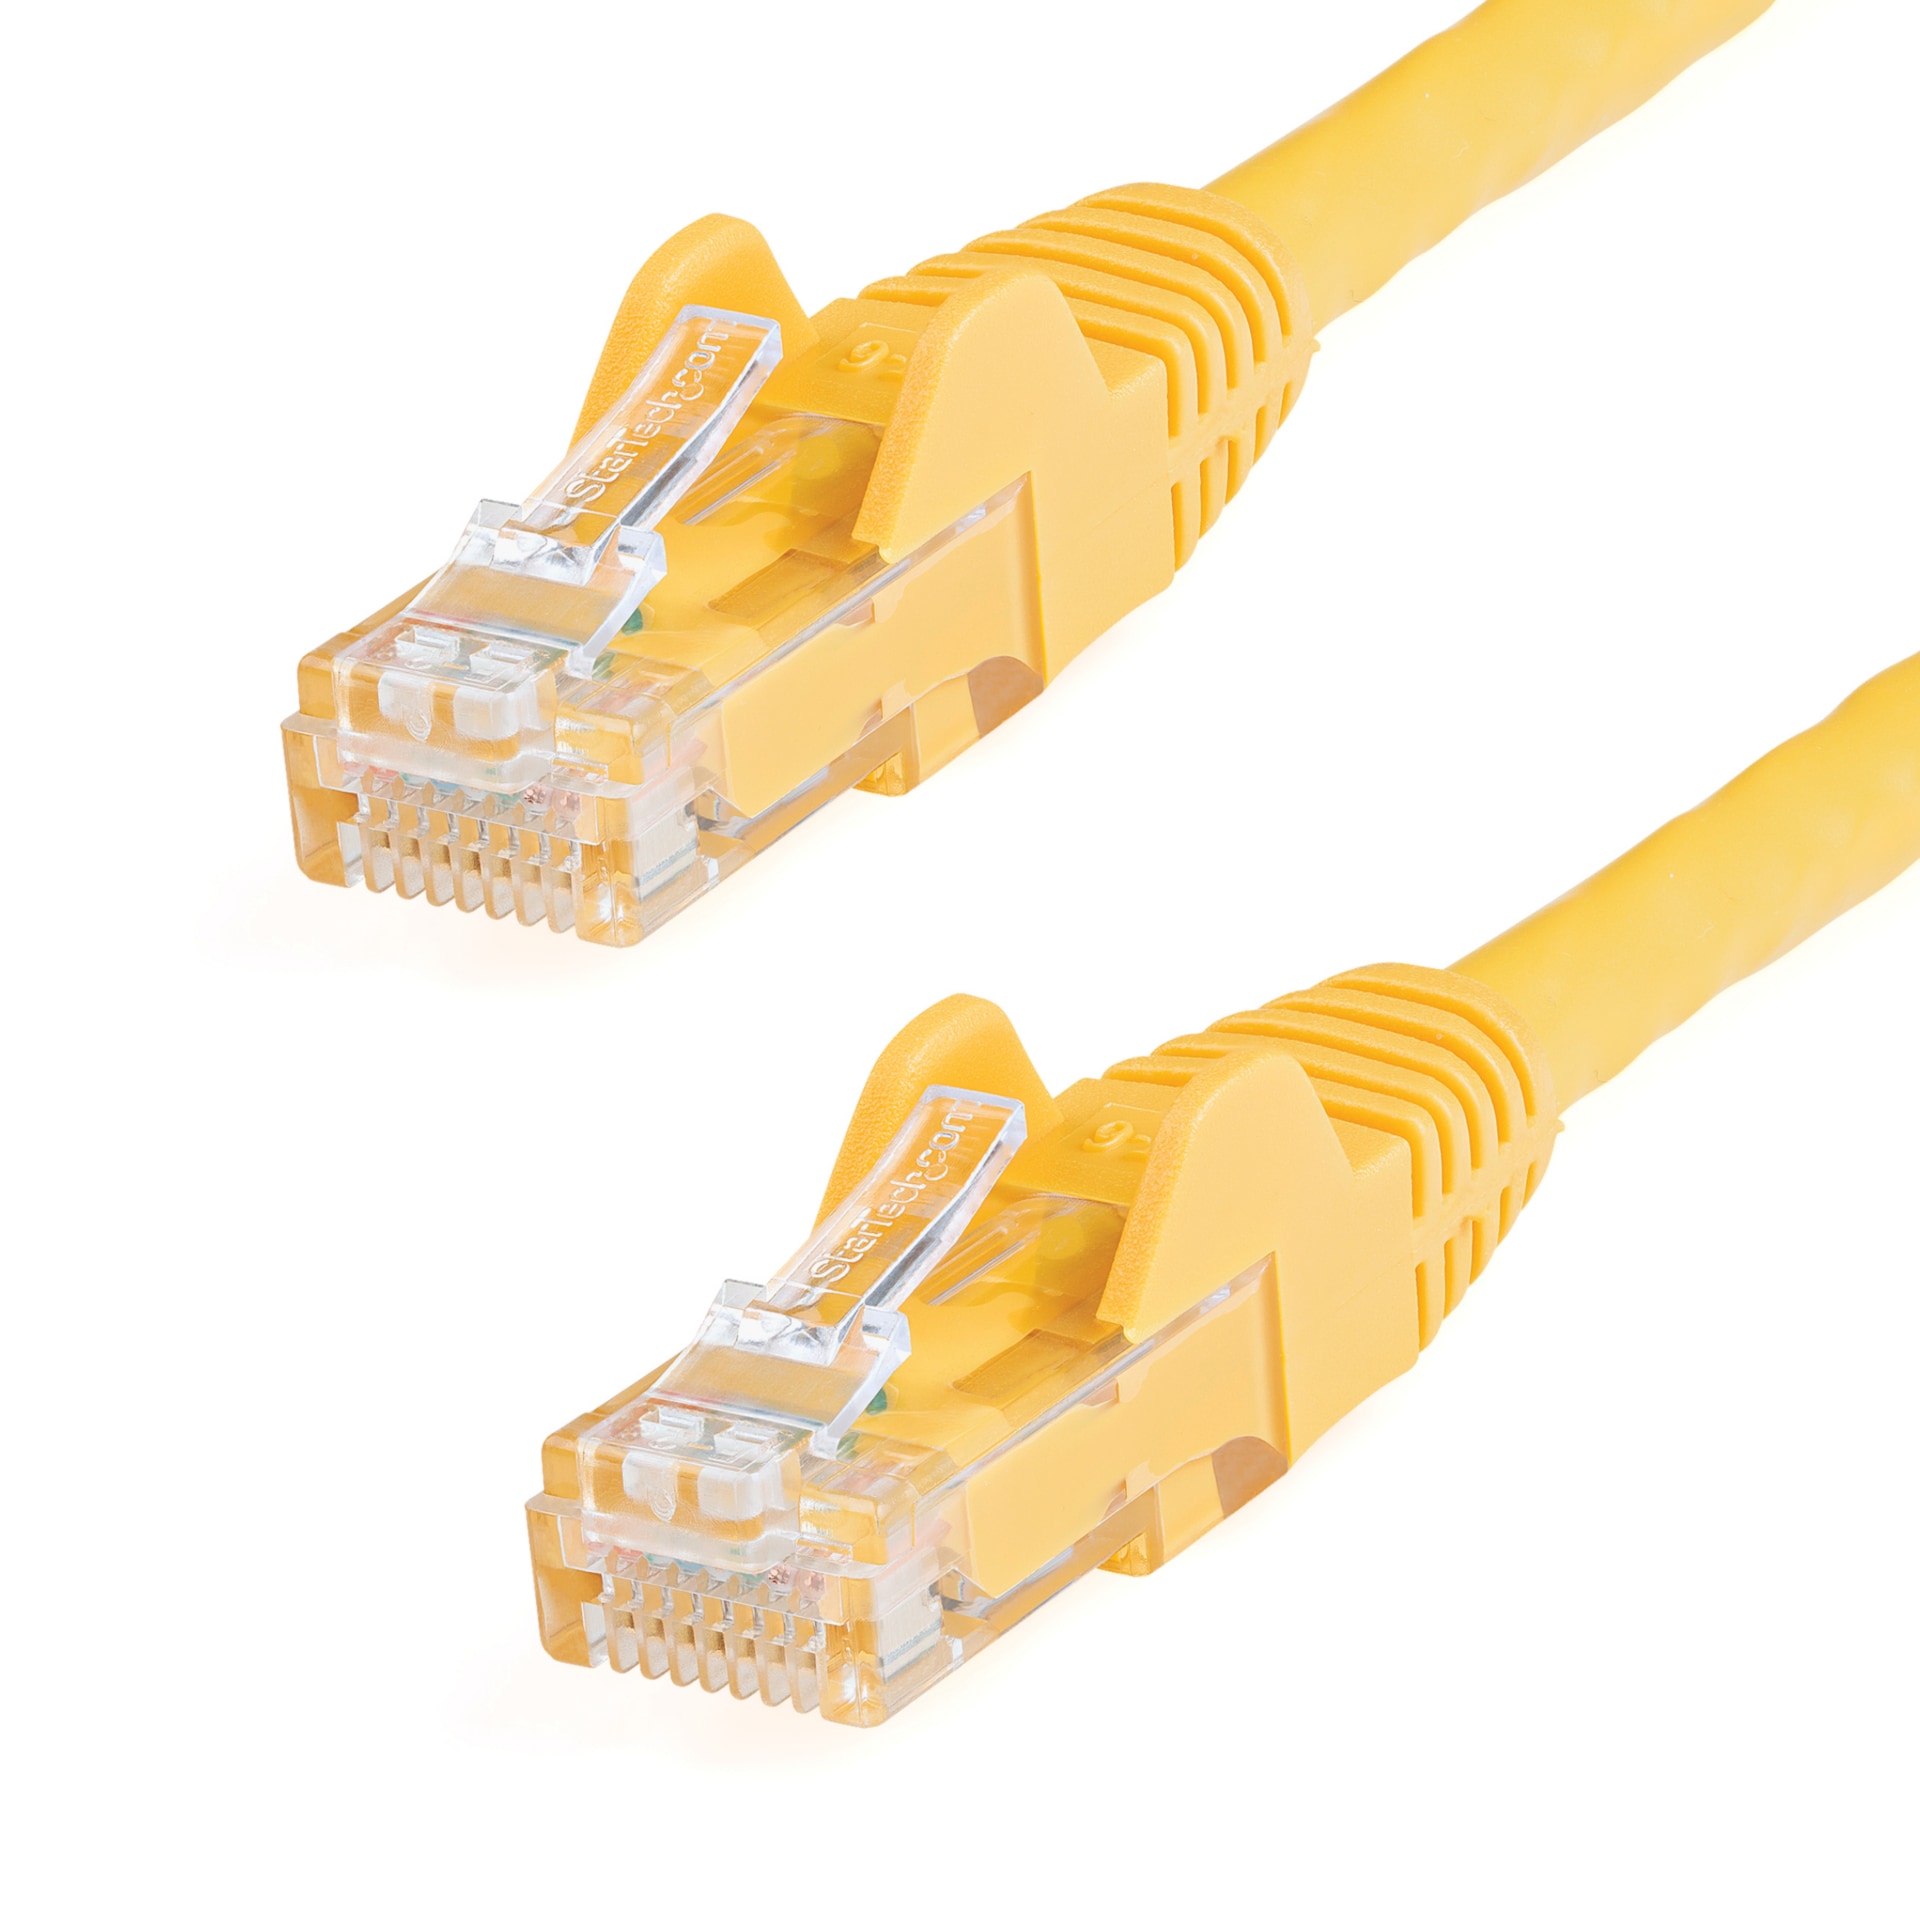 StarTech.com CAT6 Ethernet Cable 100' Yellow 650MHz PoE Snagless Patch Cord